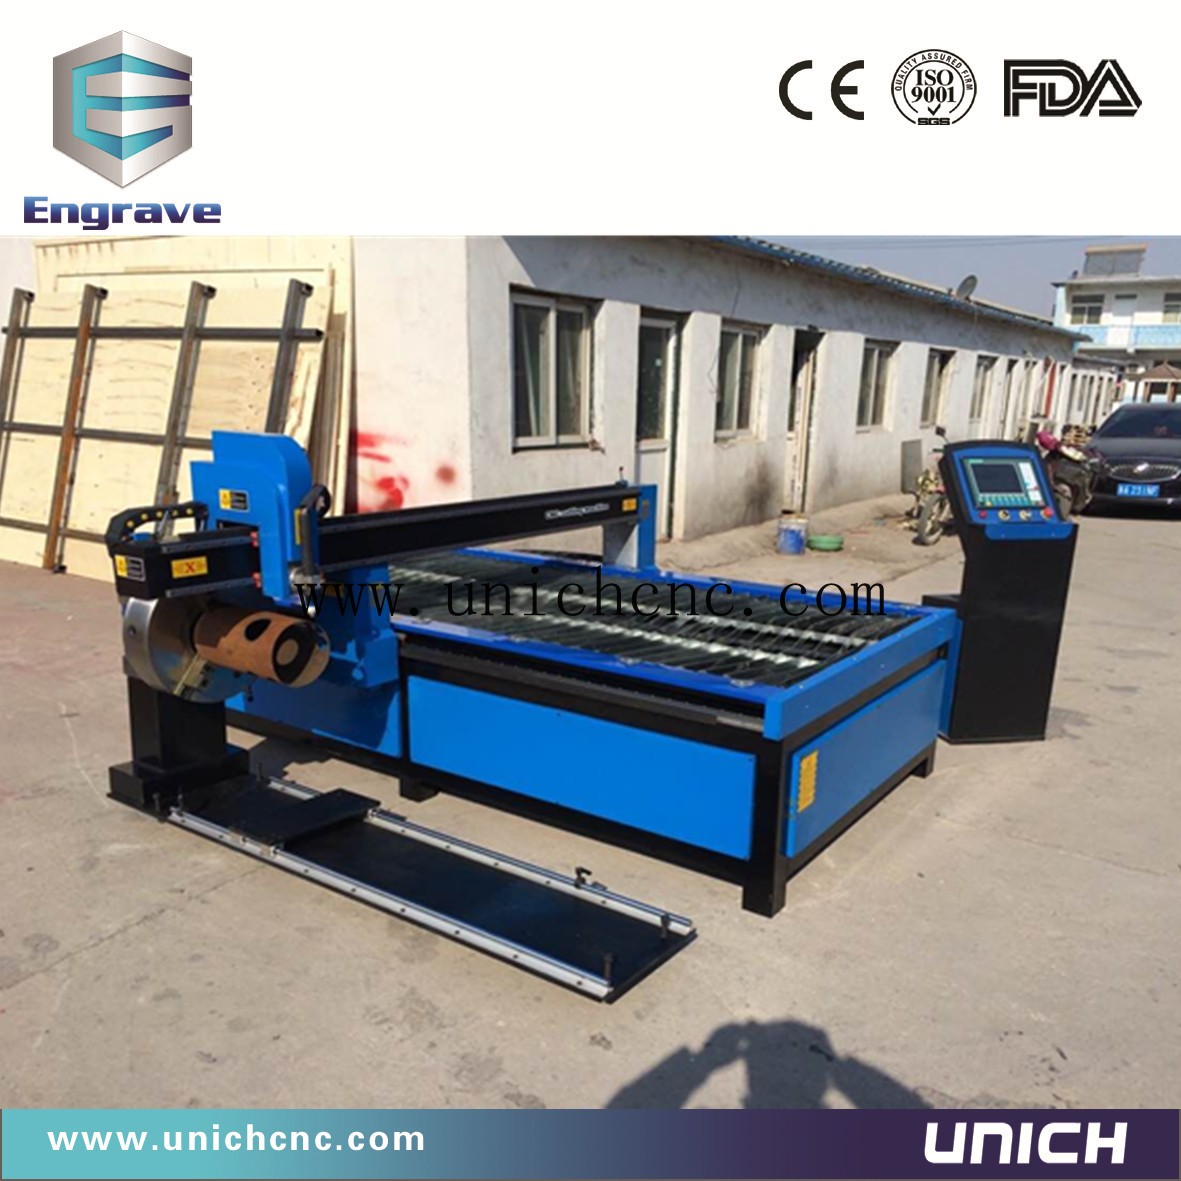 Blue color 1300*2500mm working area plasma cuttting machine with rotary